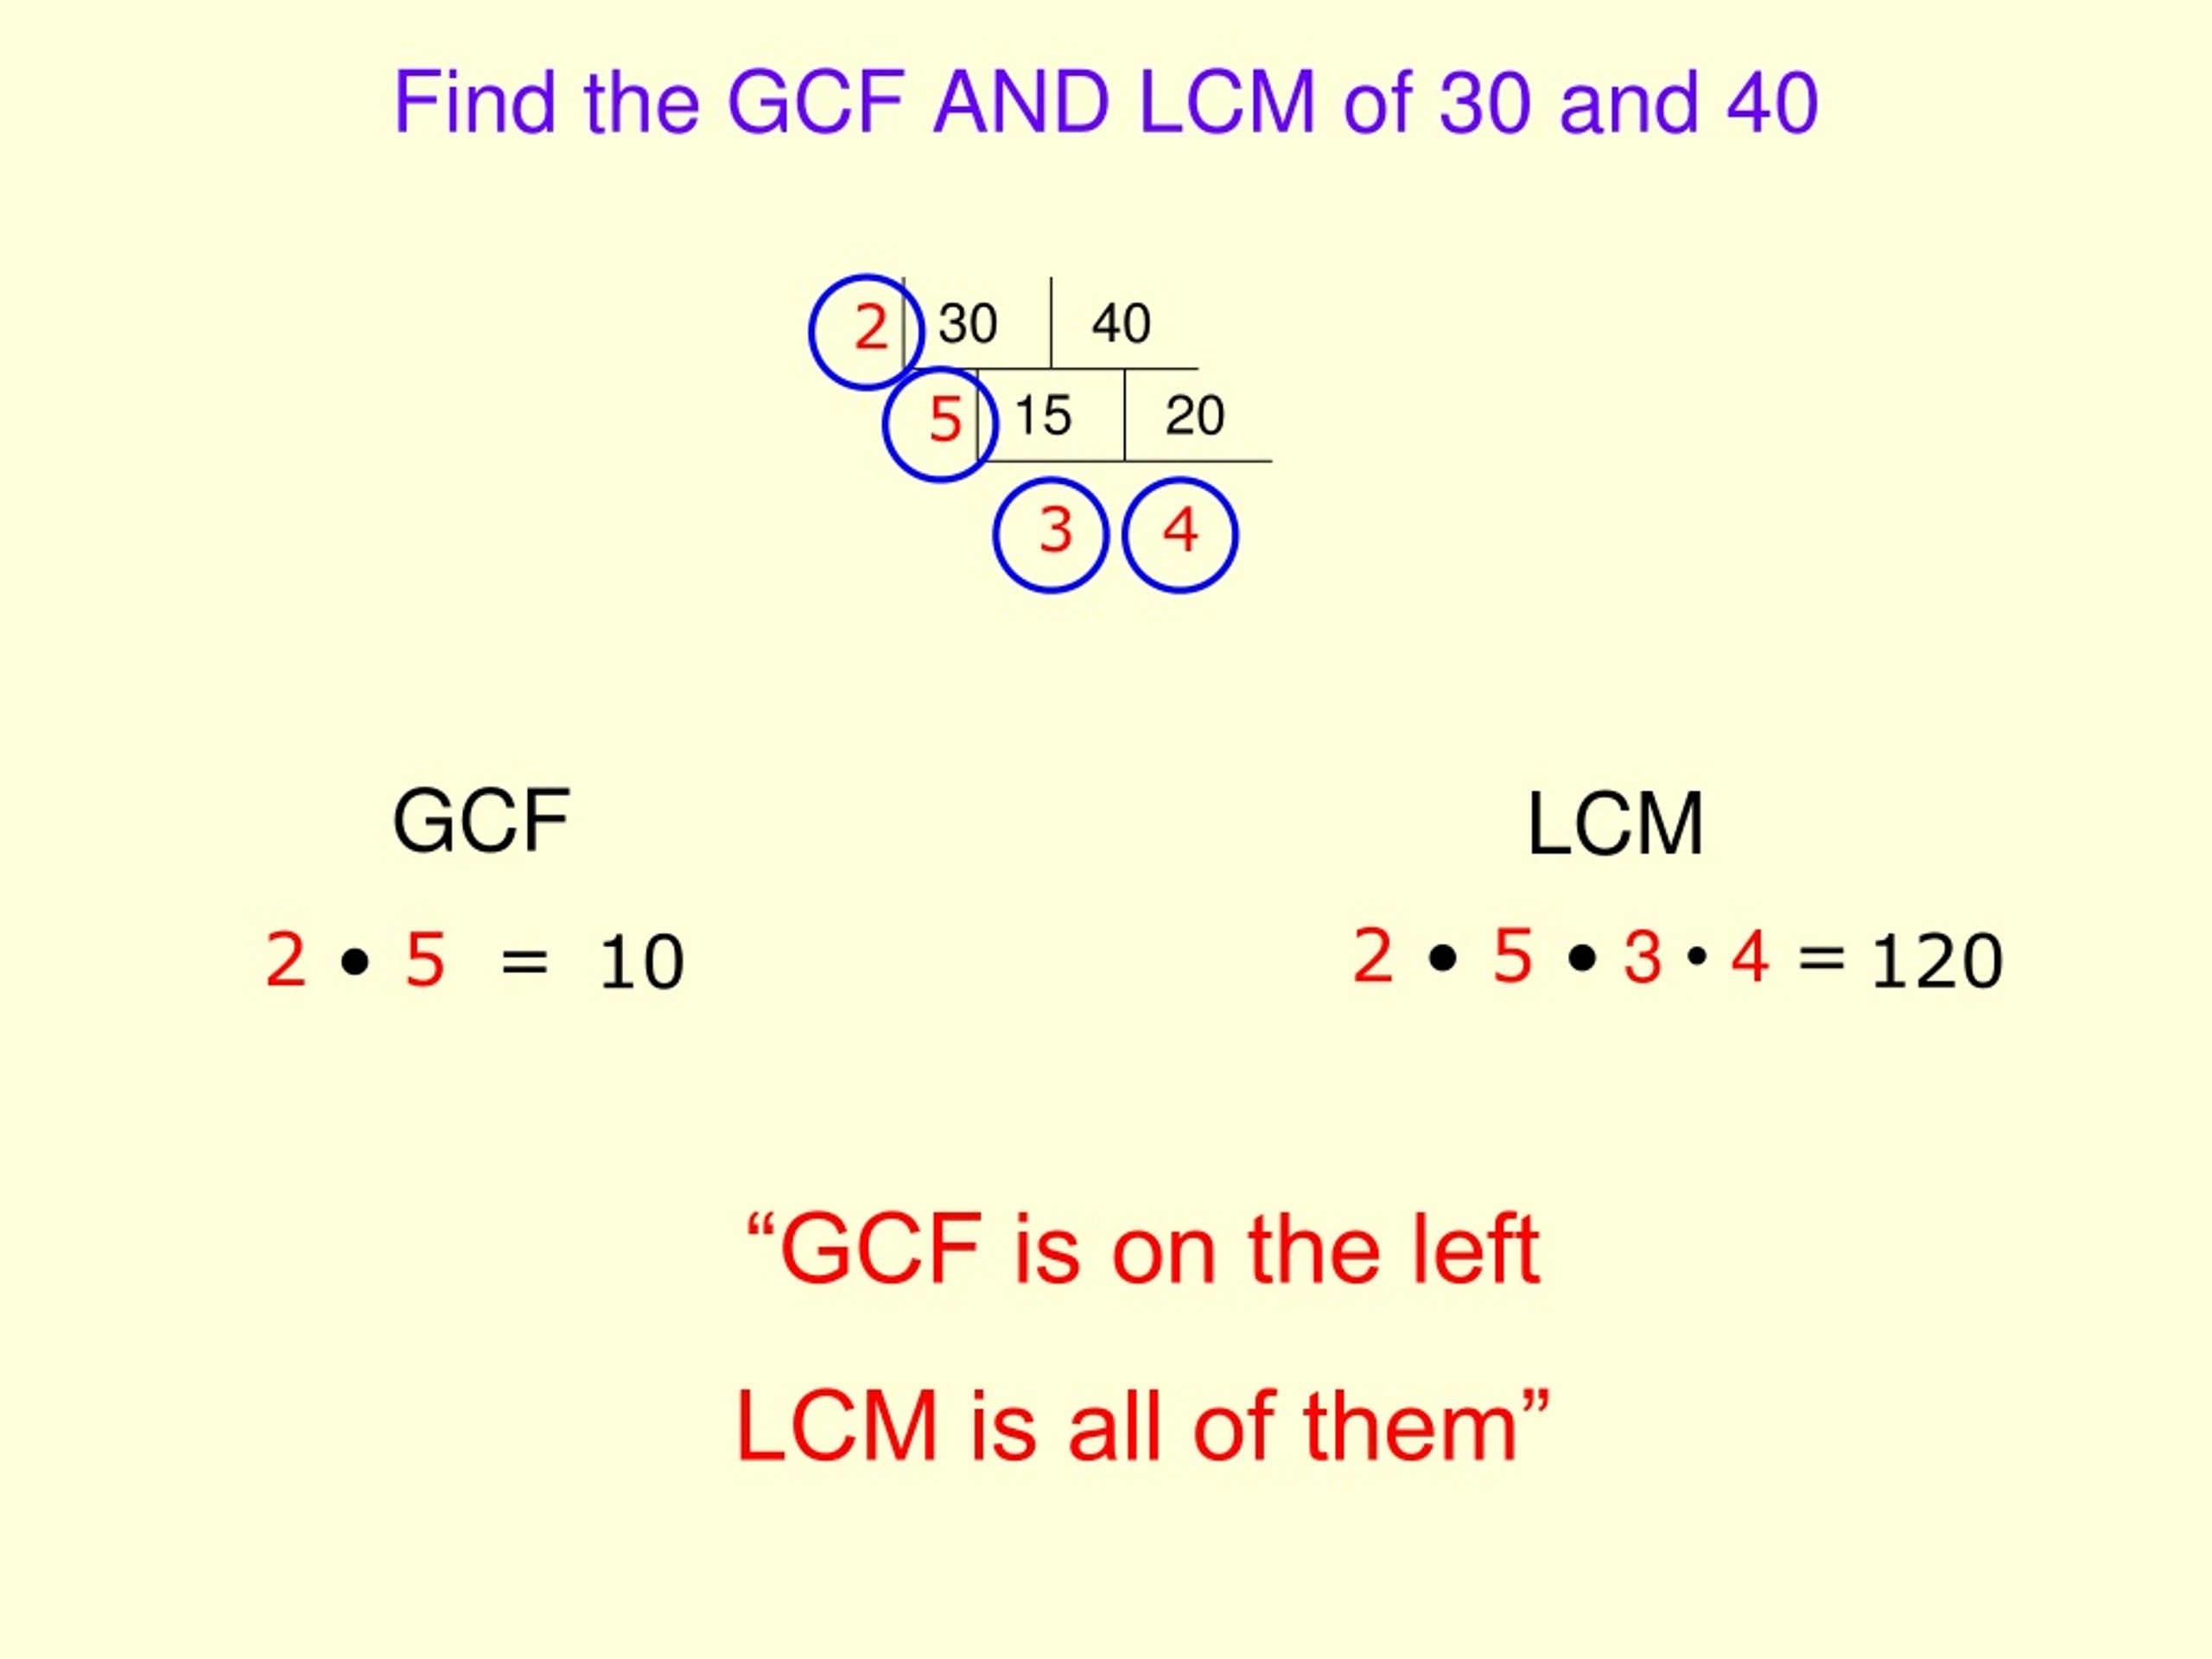 LCM and GCF of 25 and 30 